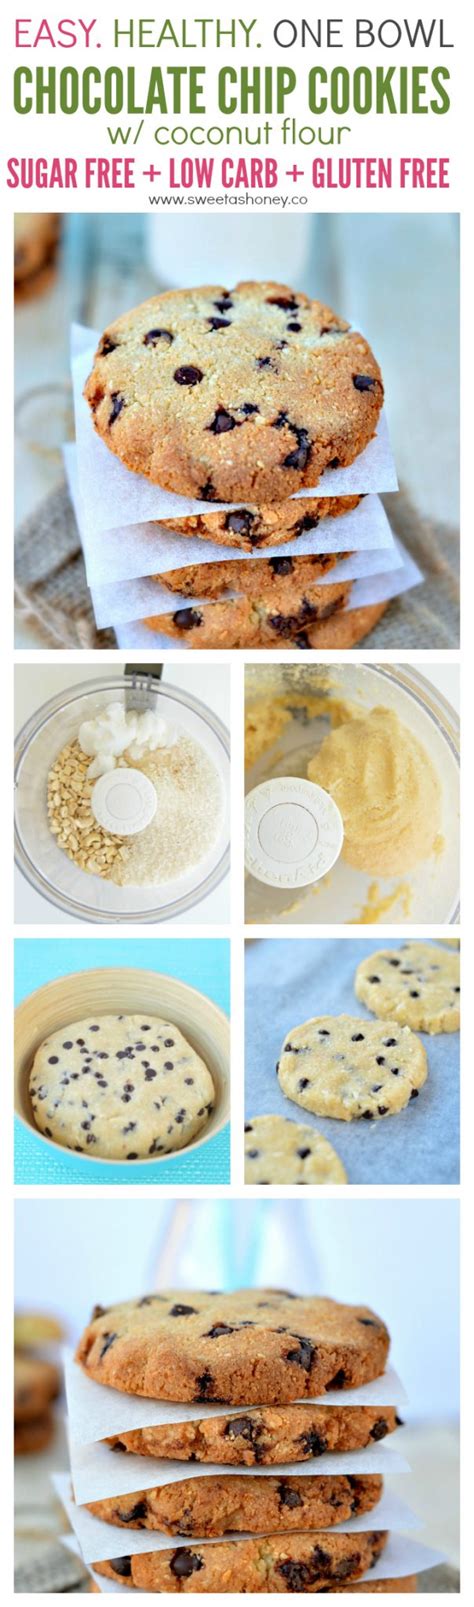 Can i eat a chocolate chip cookie on keto? Sugar free chocolate chip cookies | Low Carb, Gluten Free